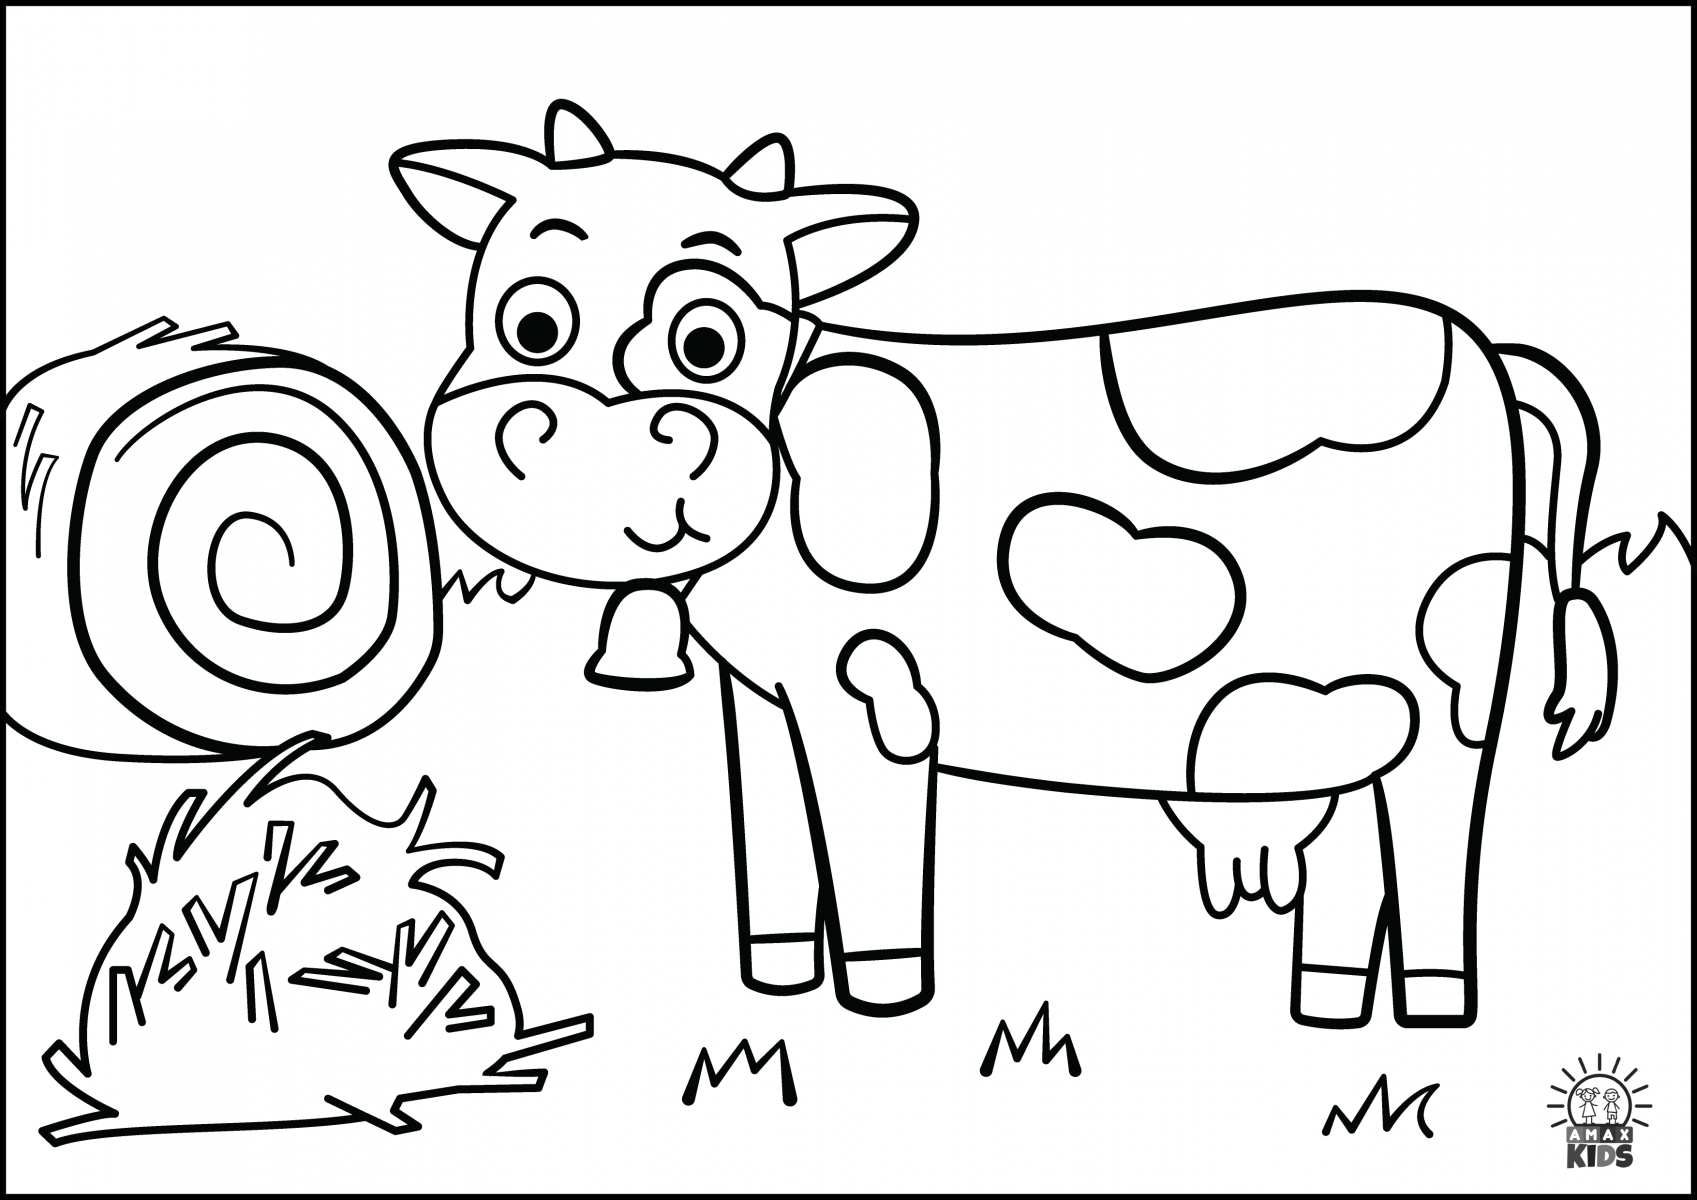 Coloring pages for kids – Animals | Amax Kids